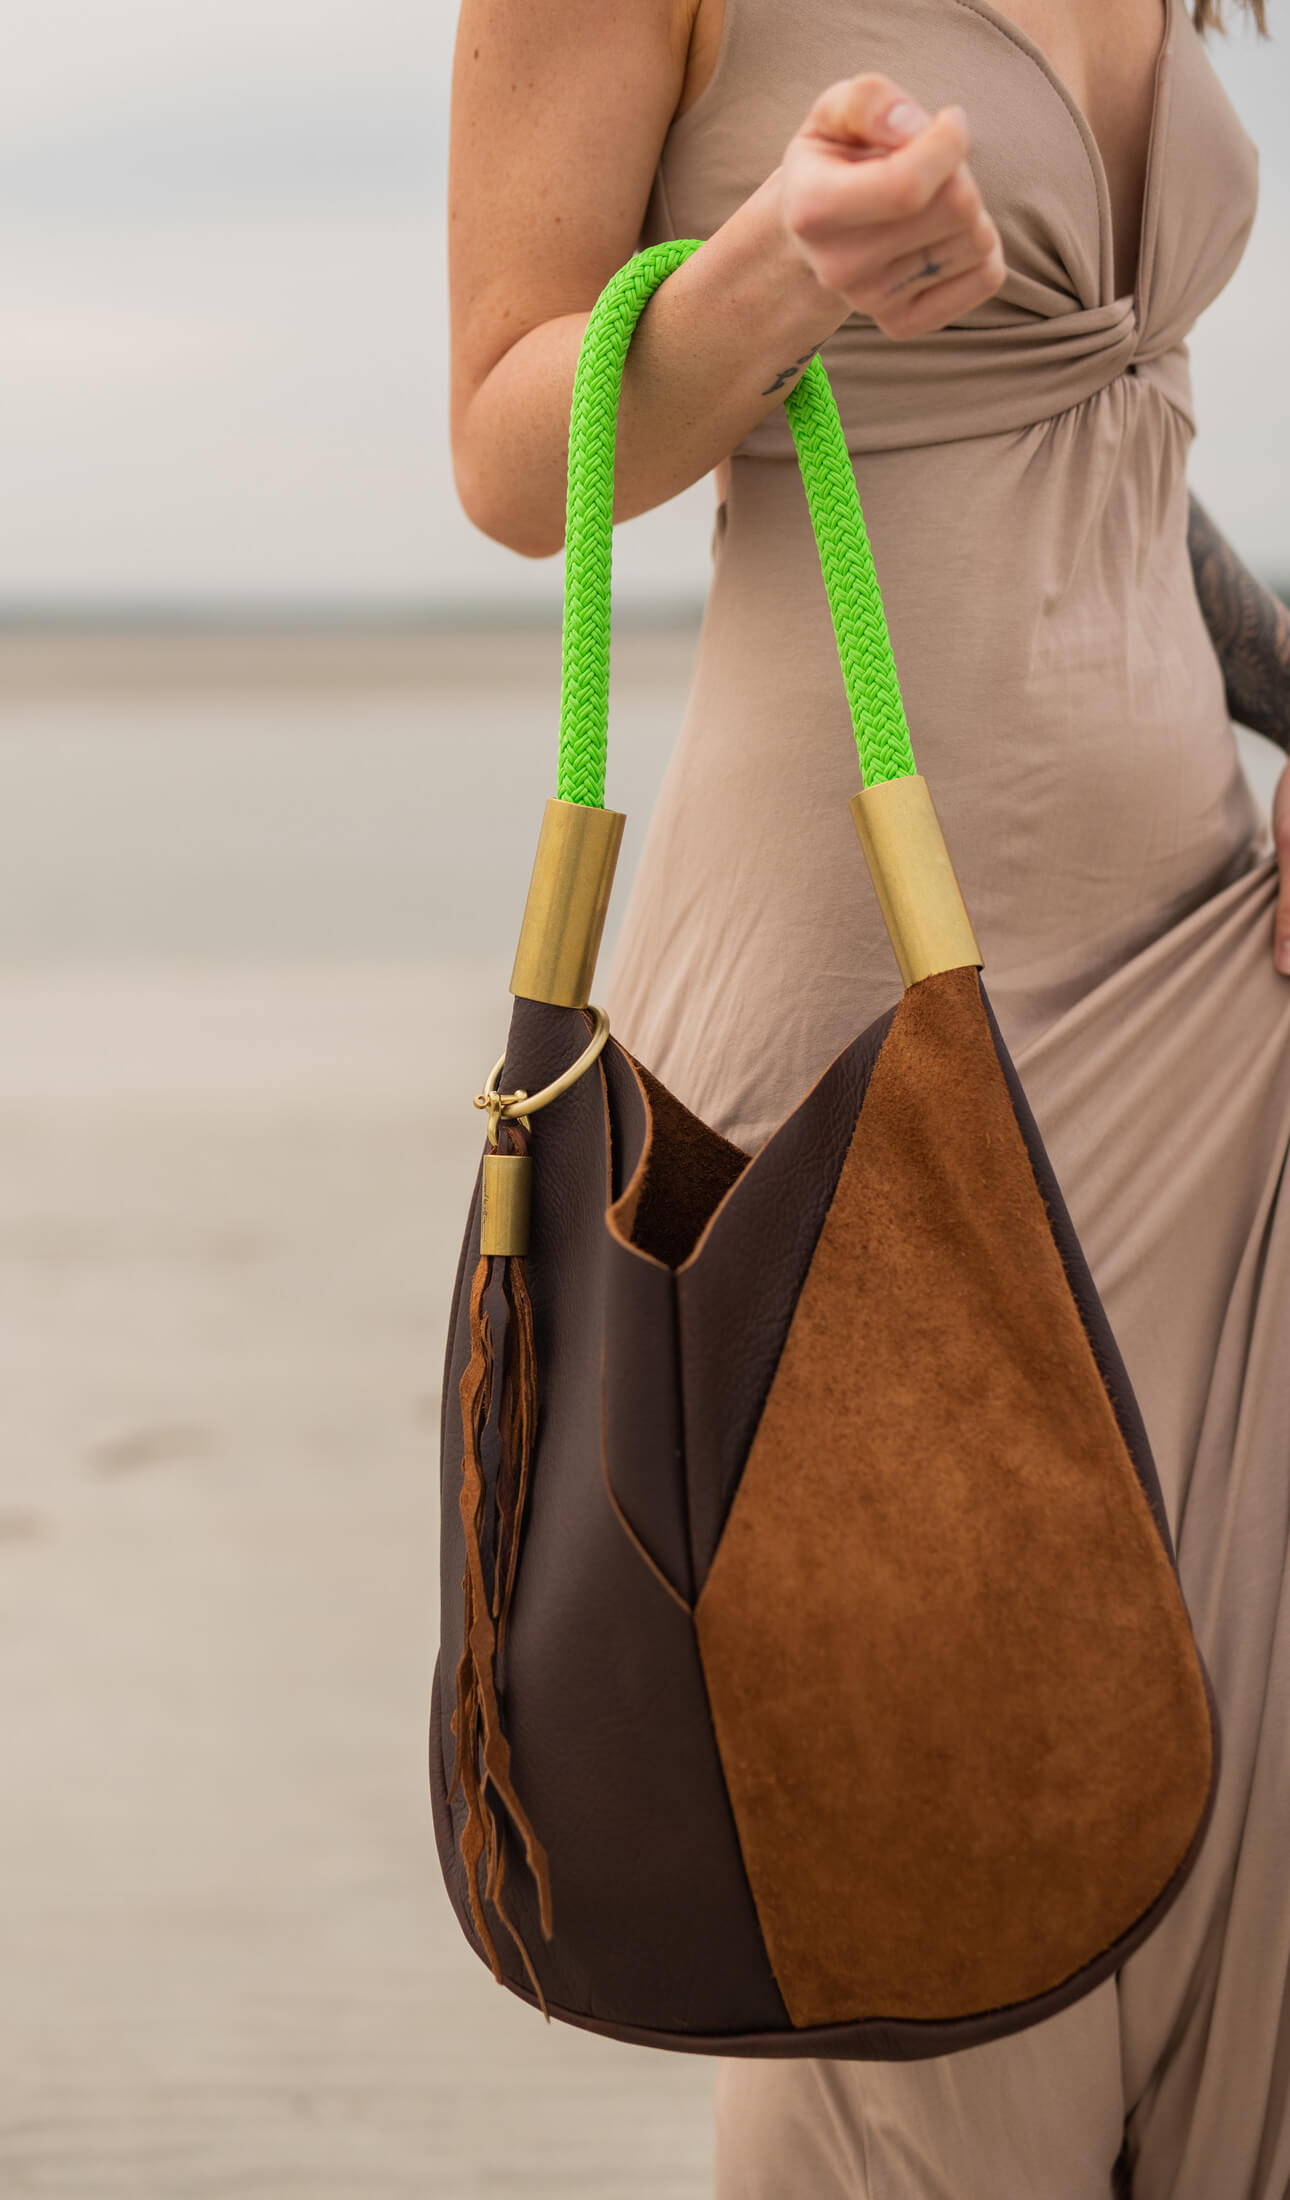 closeup on brown leather tote with neon green dock line